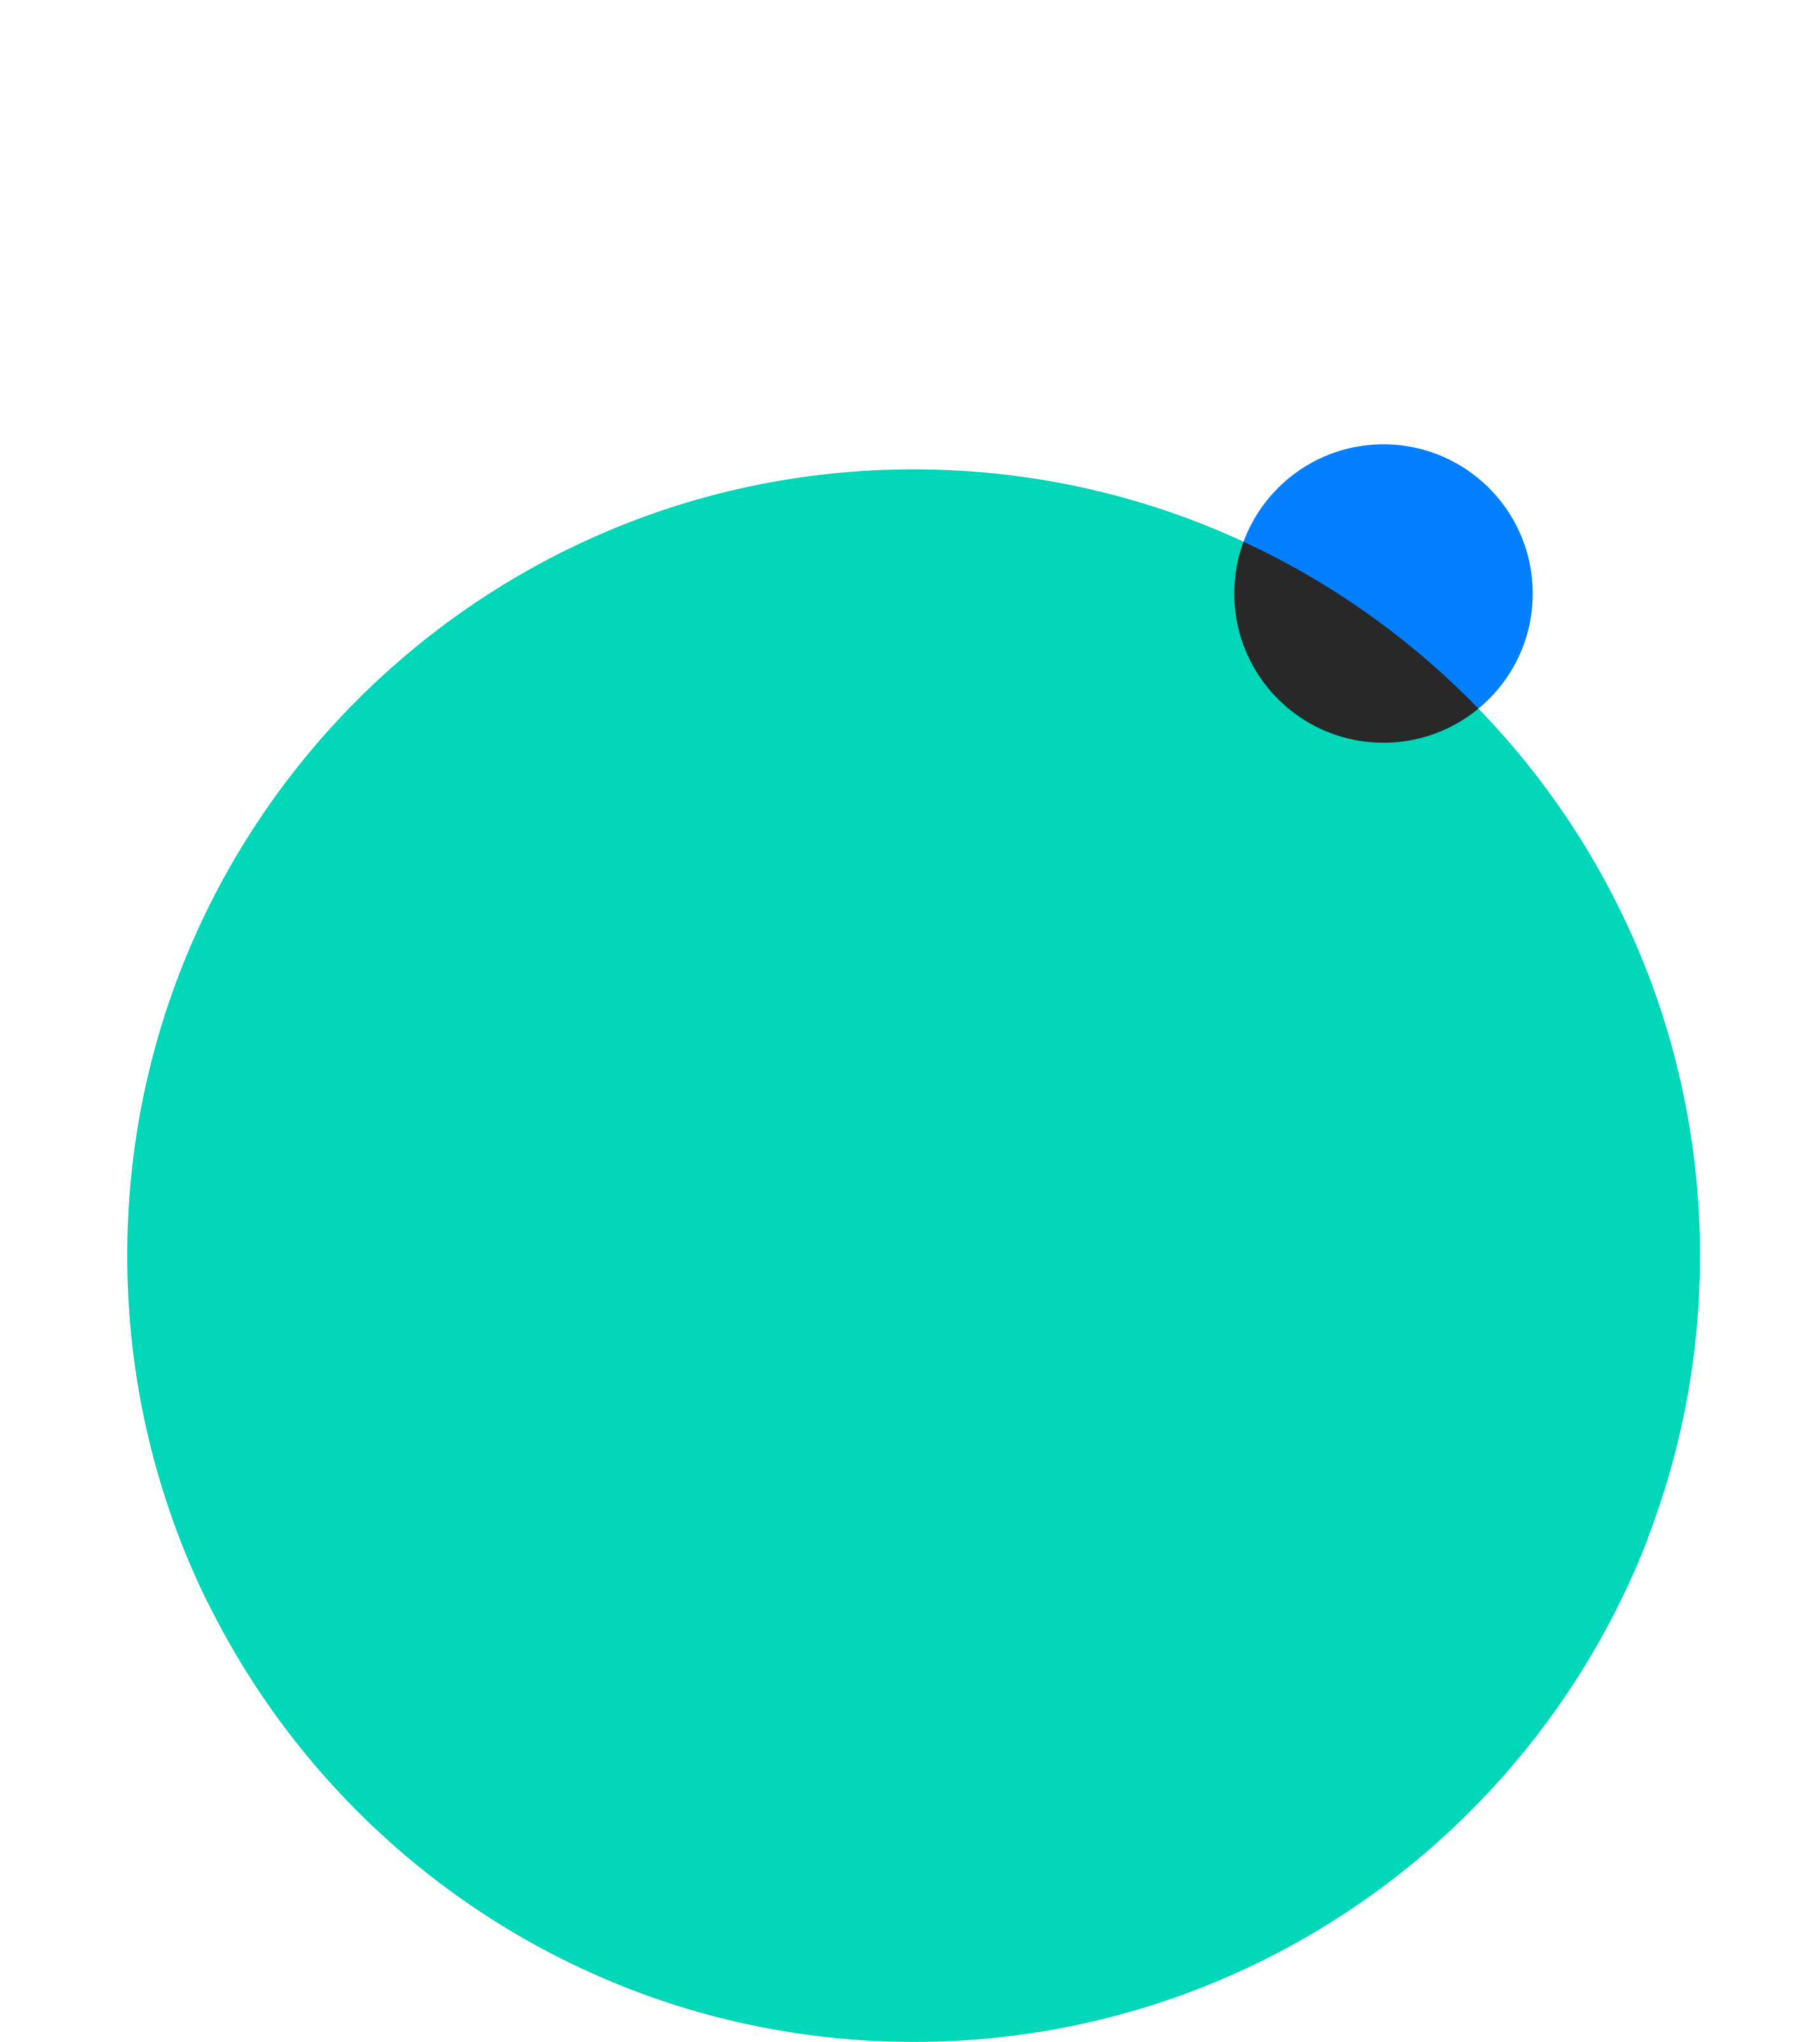 Abstract illustration of two overlapping circles